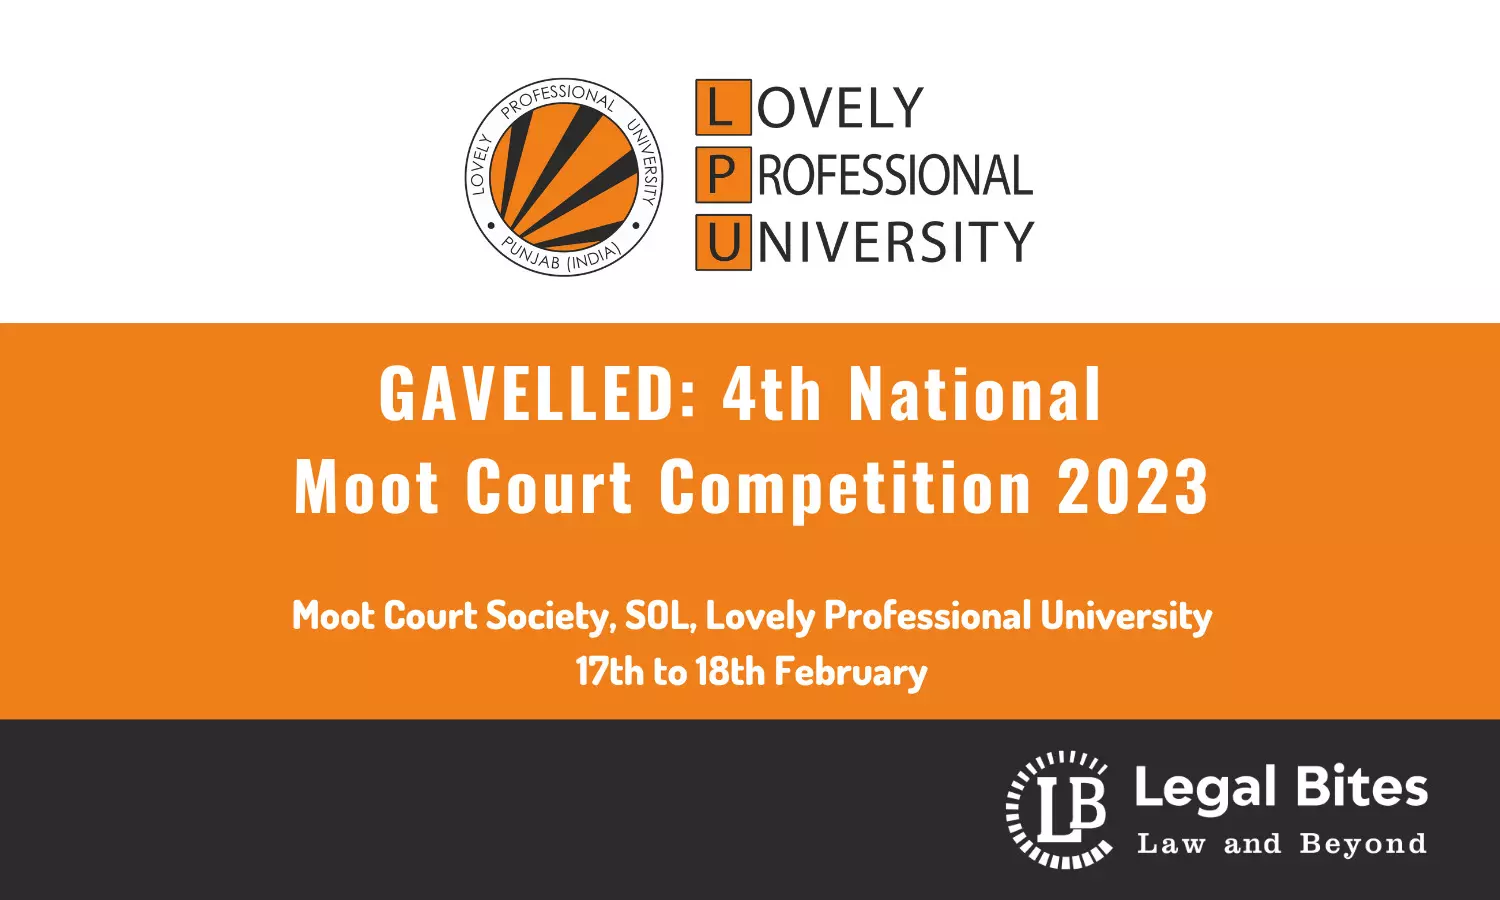 GAVELLED: 4th National Moot Court Competition, 2023